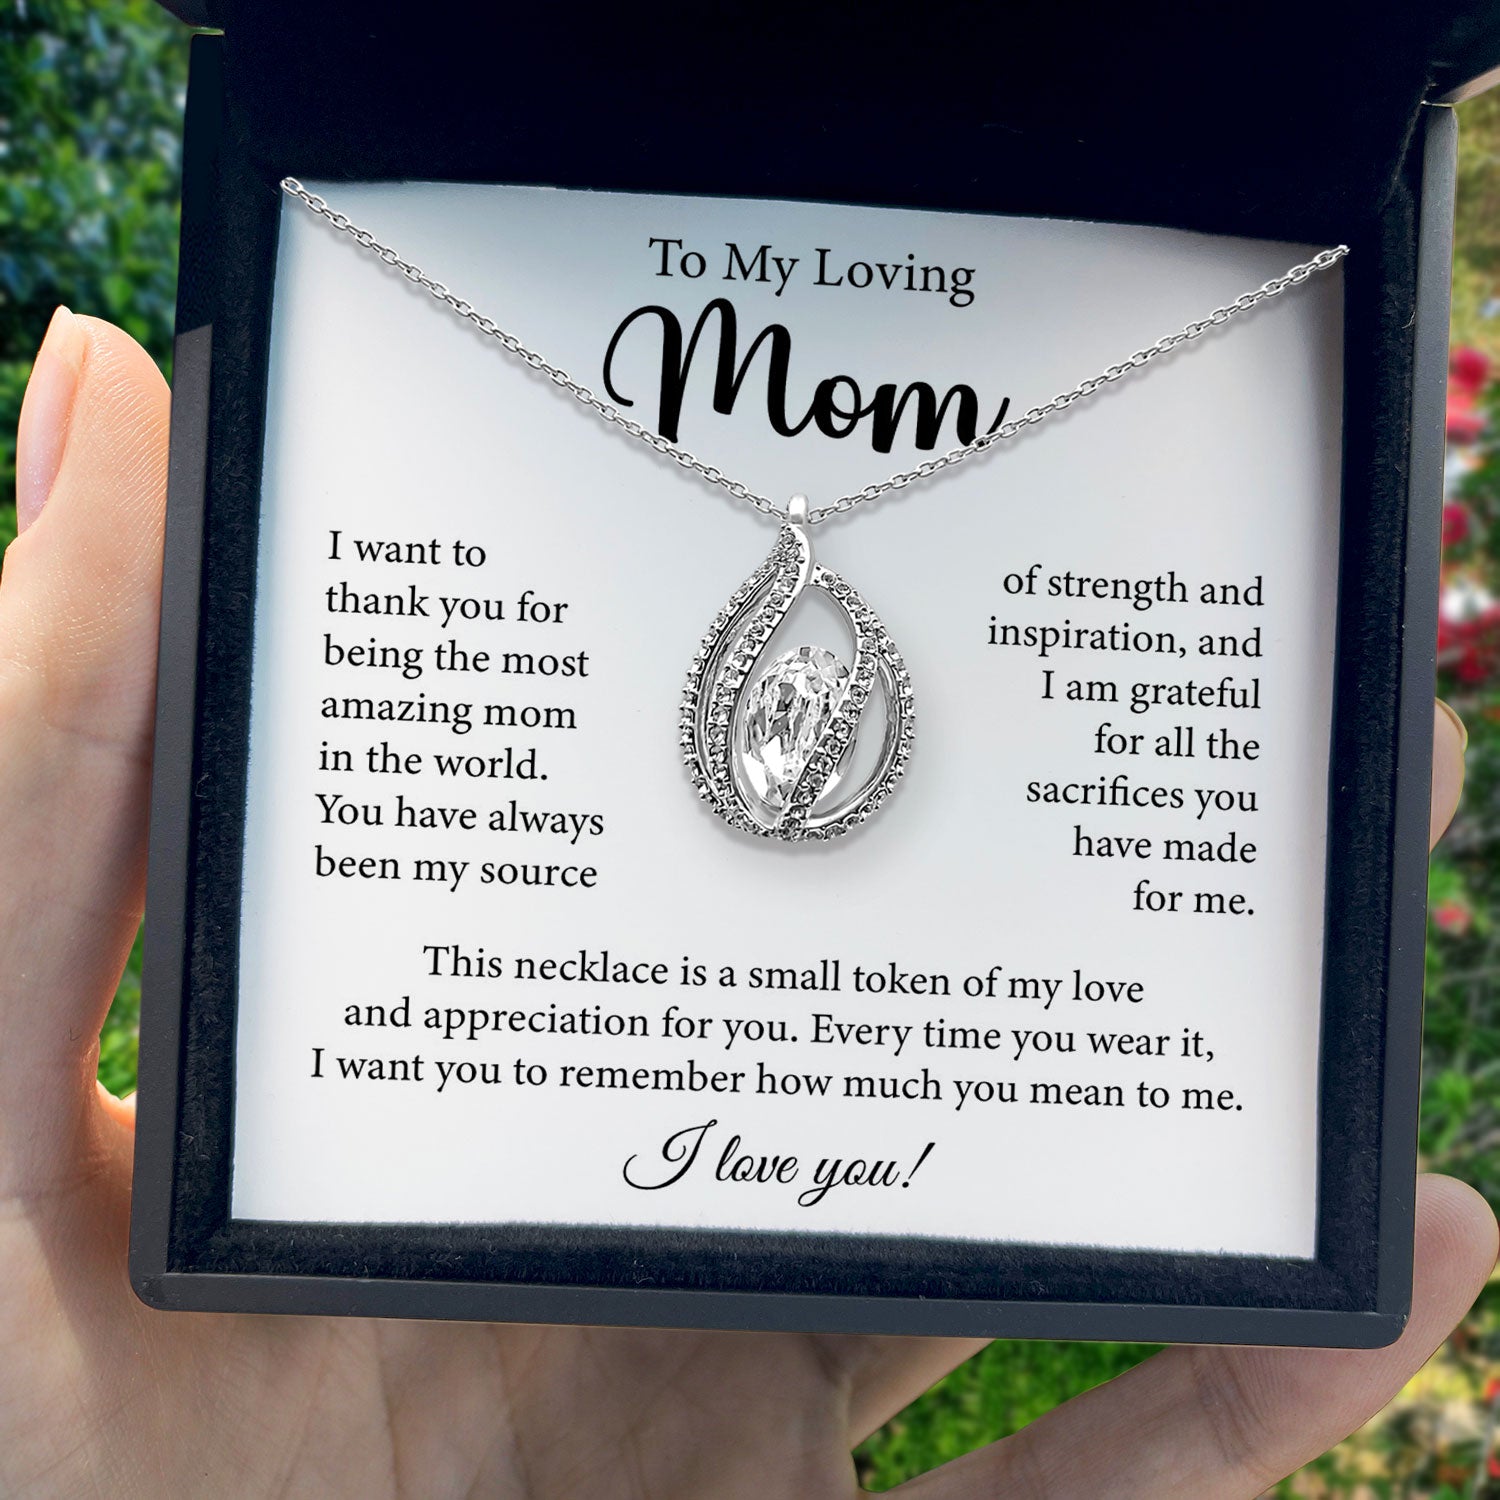 To My Loving Mom - This Necklace is a Small Token of My Love - Orbital Birdcage Necklace